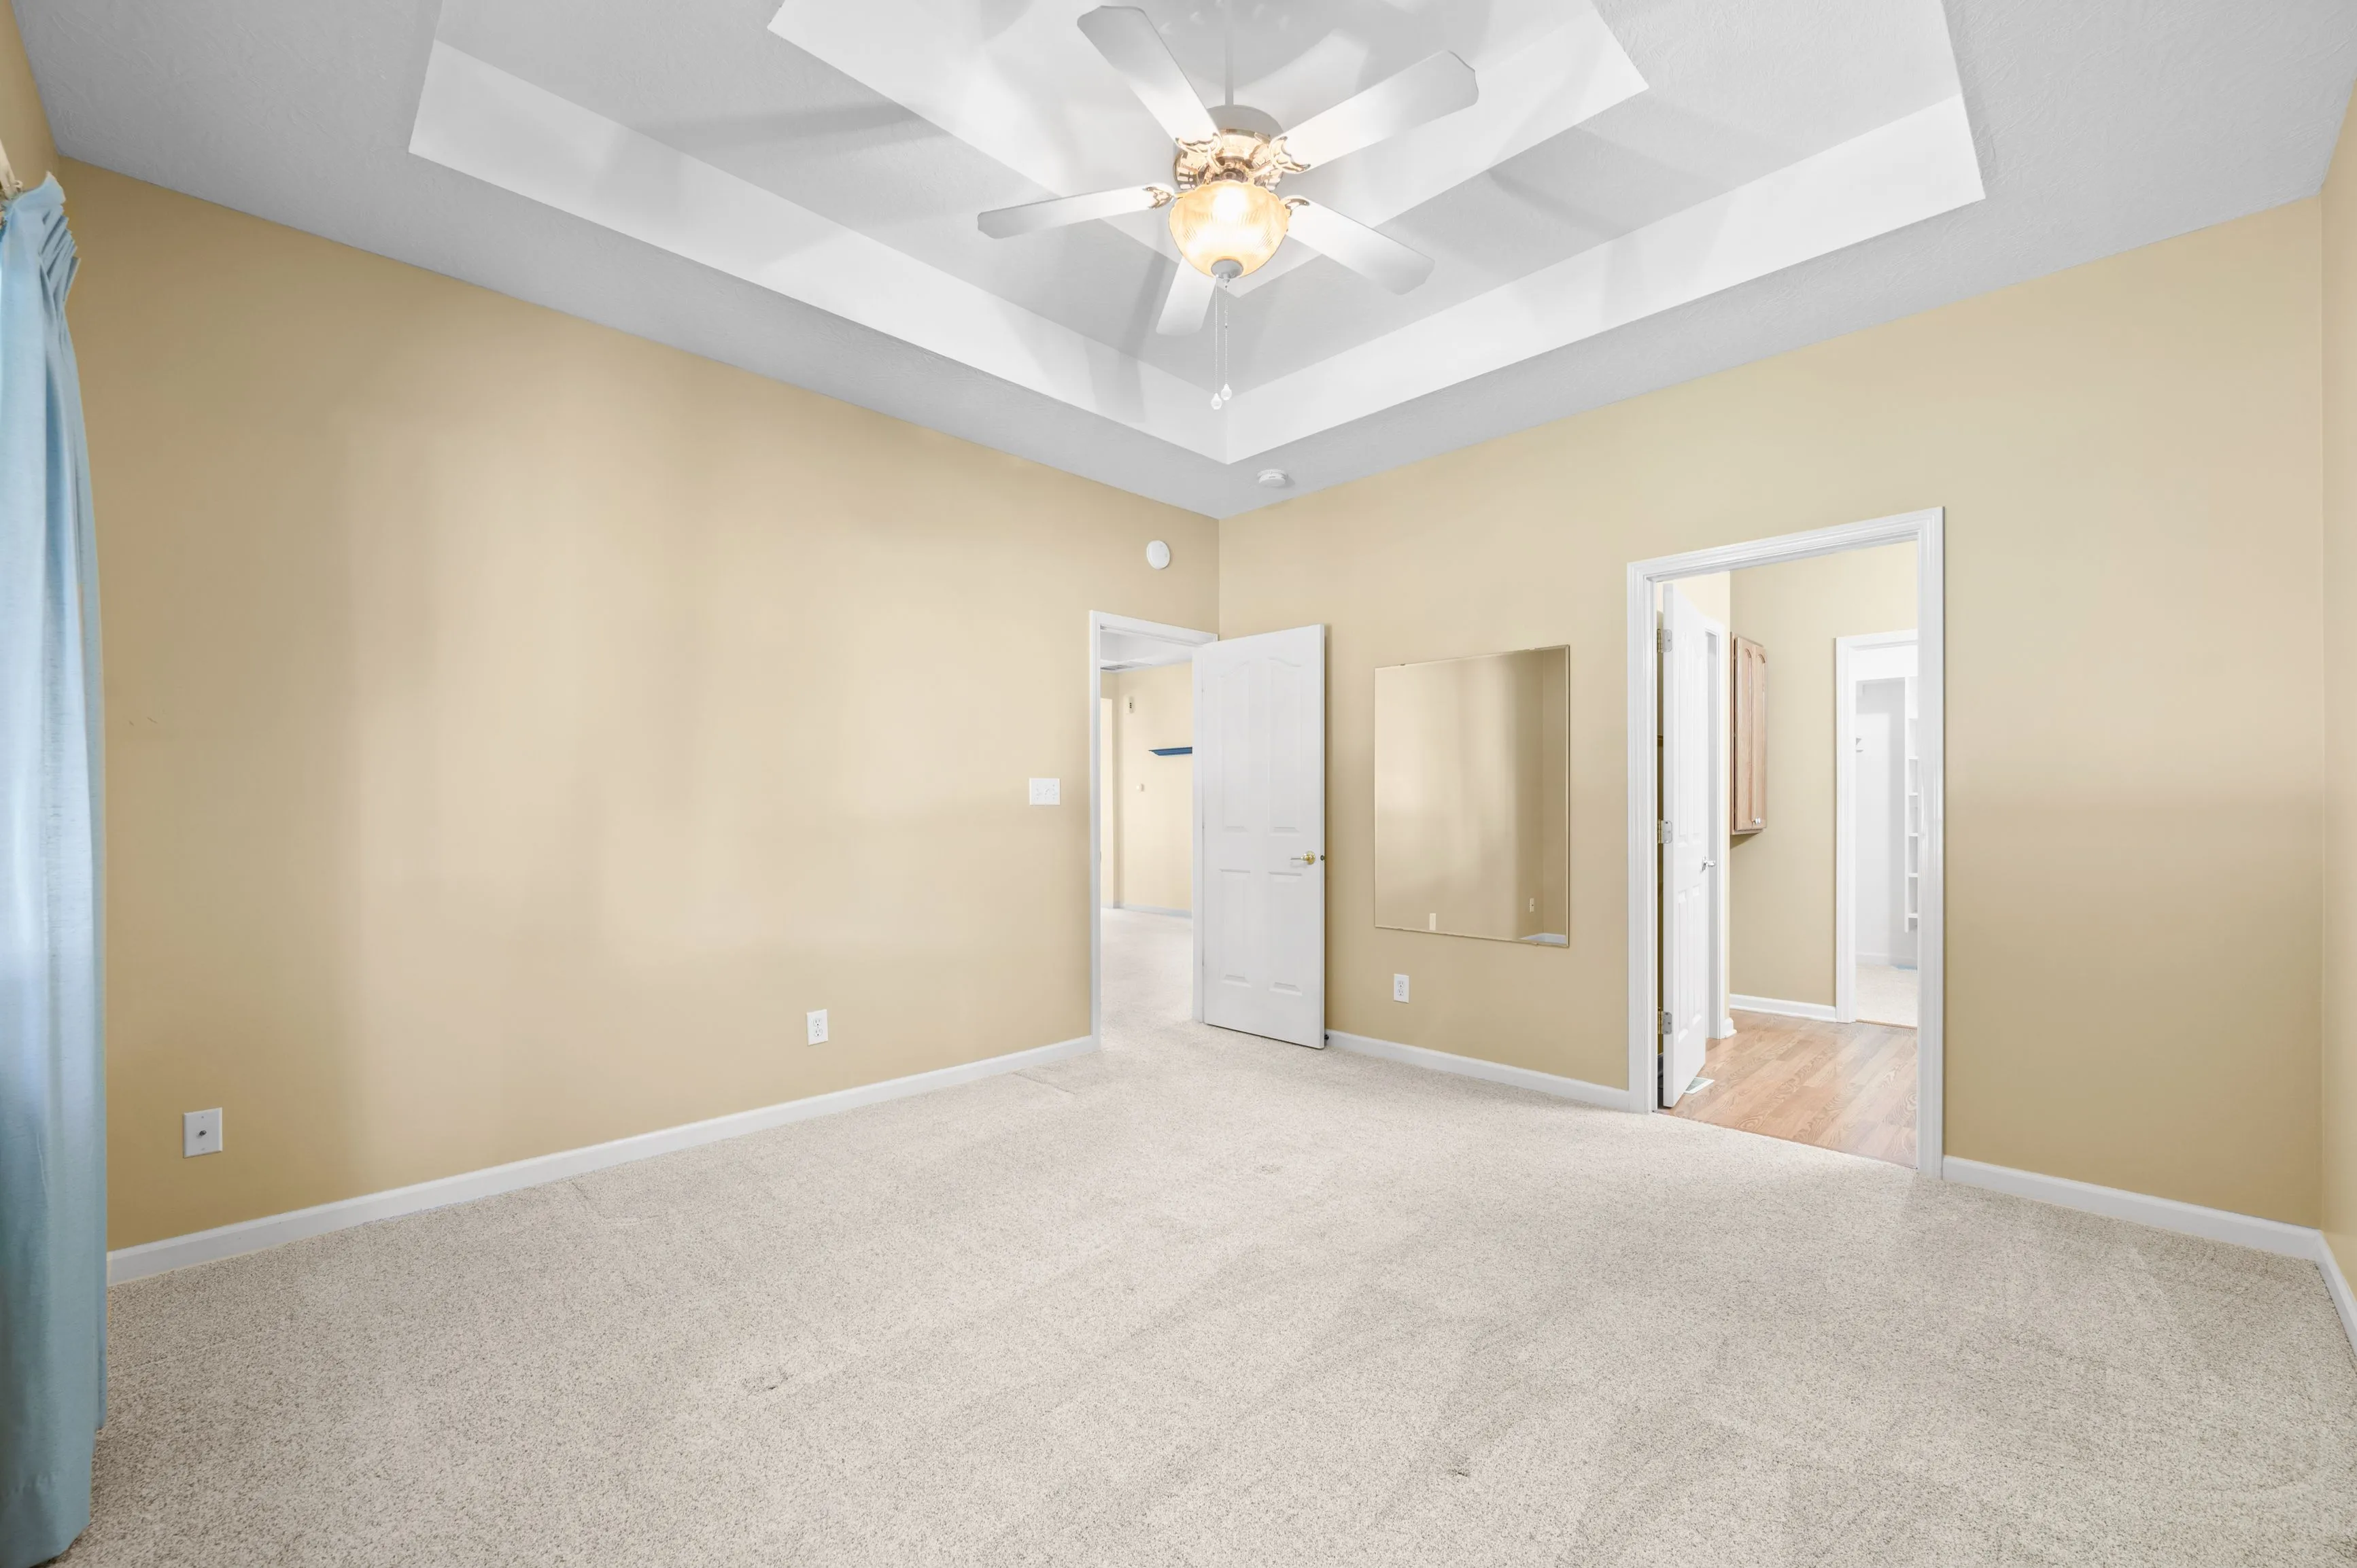 Empty room with beige walls, white ceiling fan, and carpeted floor, showing open doors to adjacent rooms.